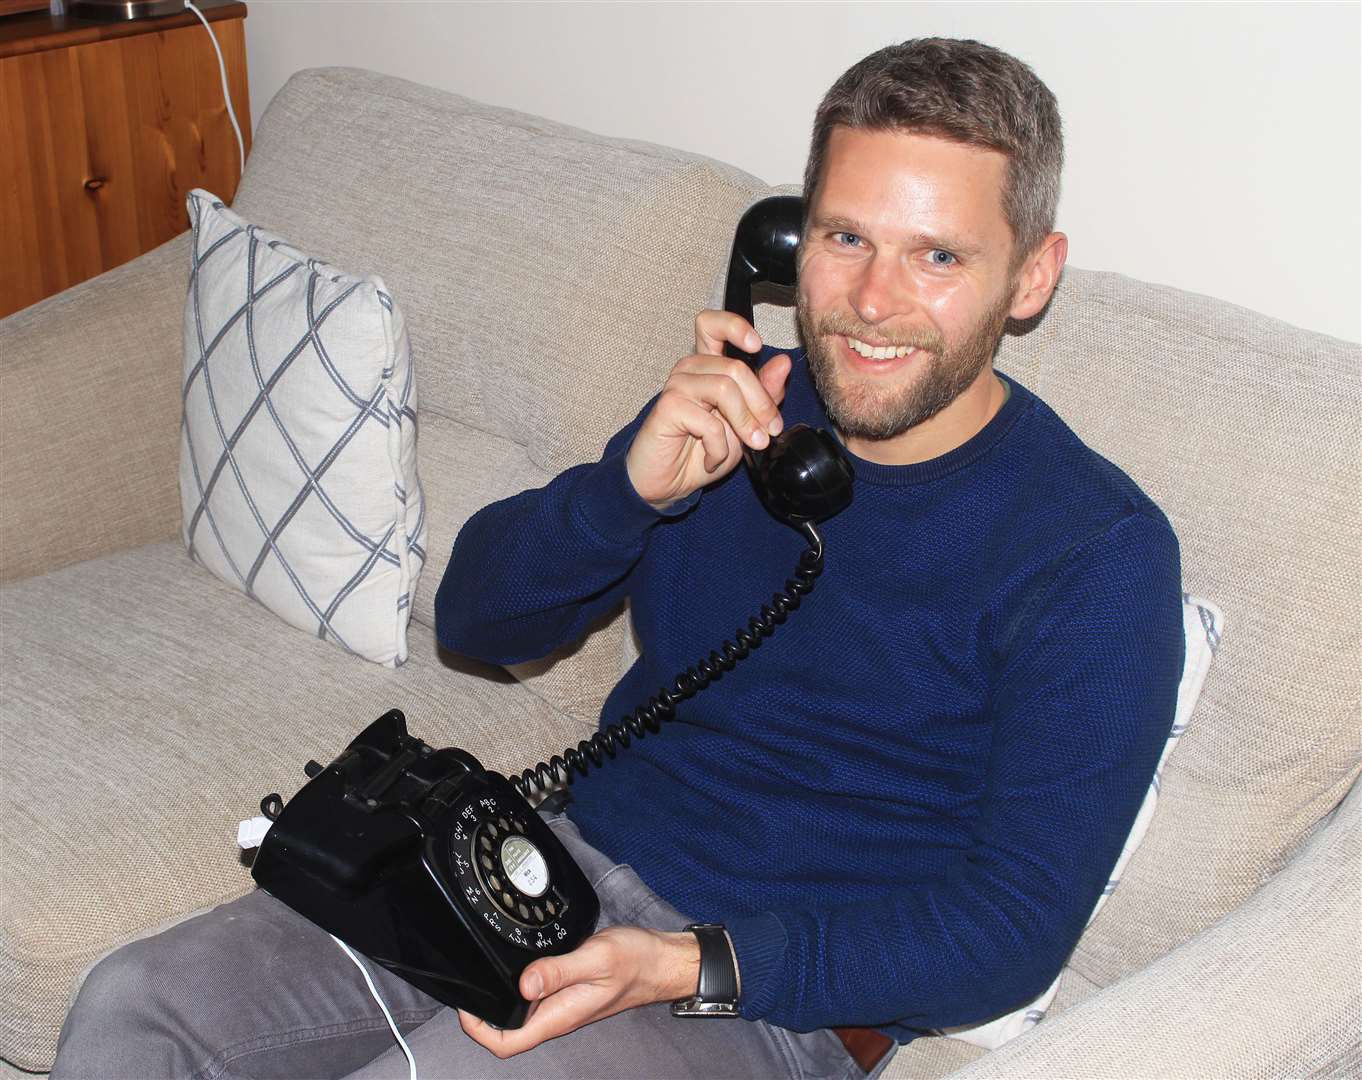 Chris Aitken calling up an oral history recording on the old-style phone.